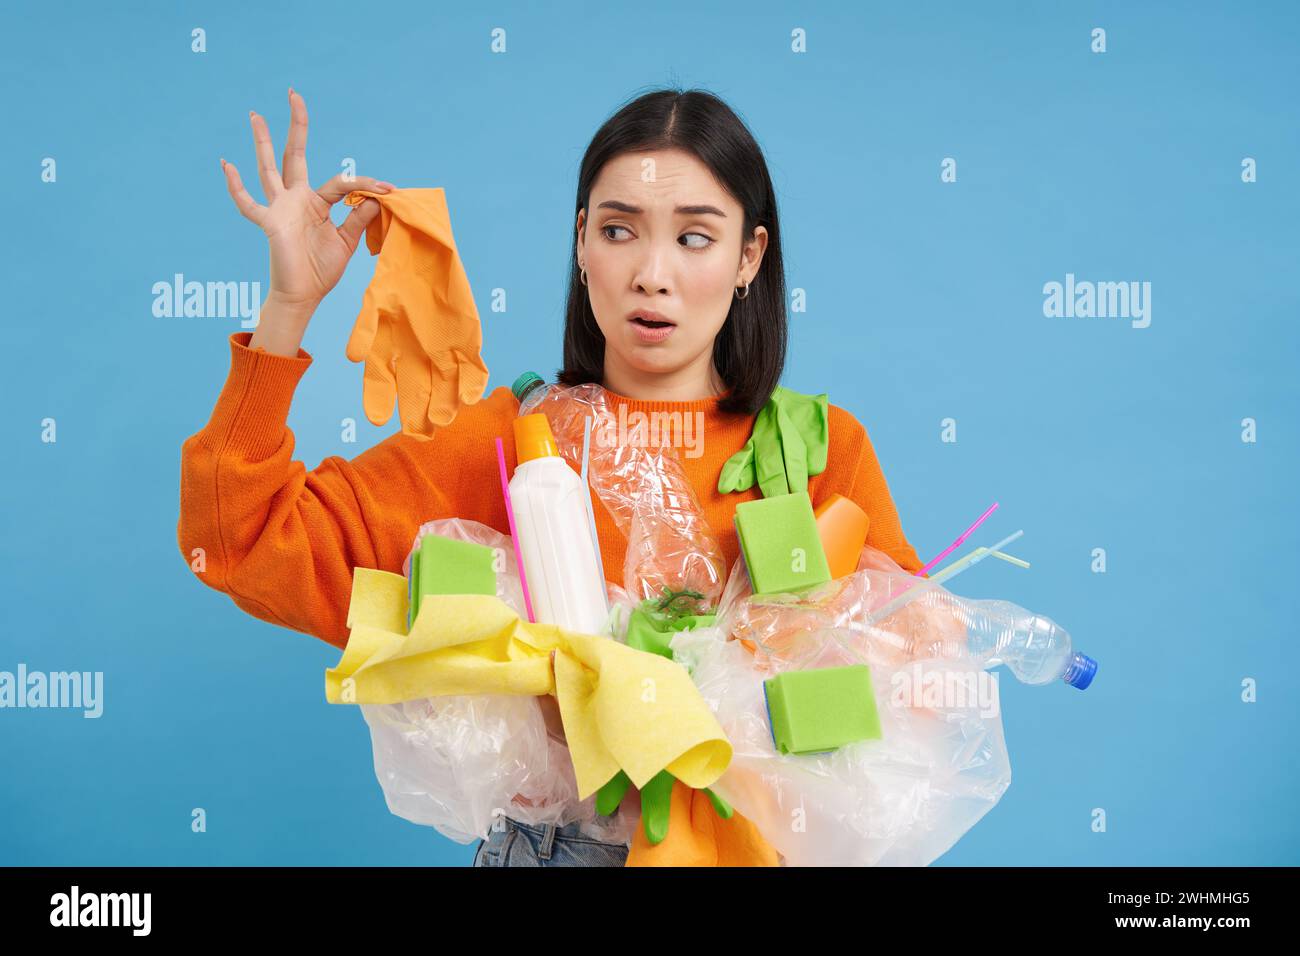 Young woman holds plastic garbage, looks at glove with shocked face, stinky waste, sorting litter for recycling, blue background Stock Photo